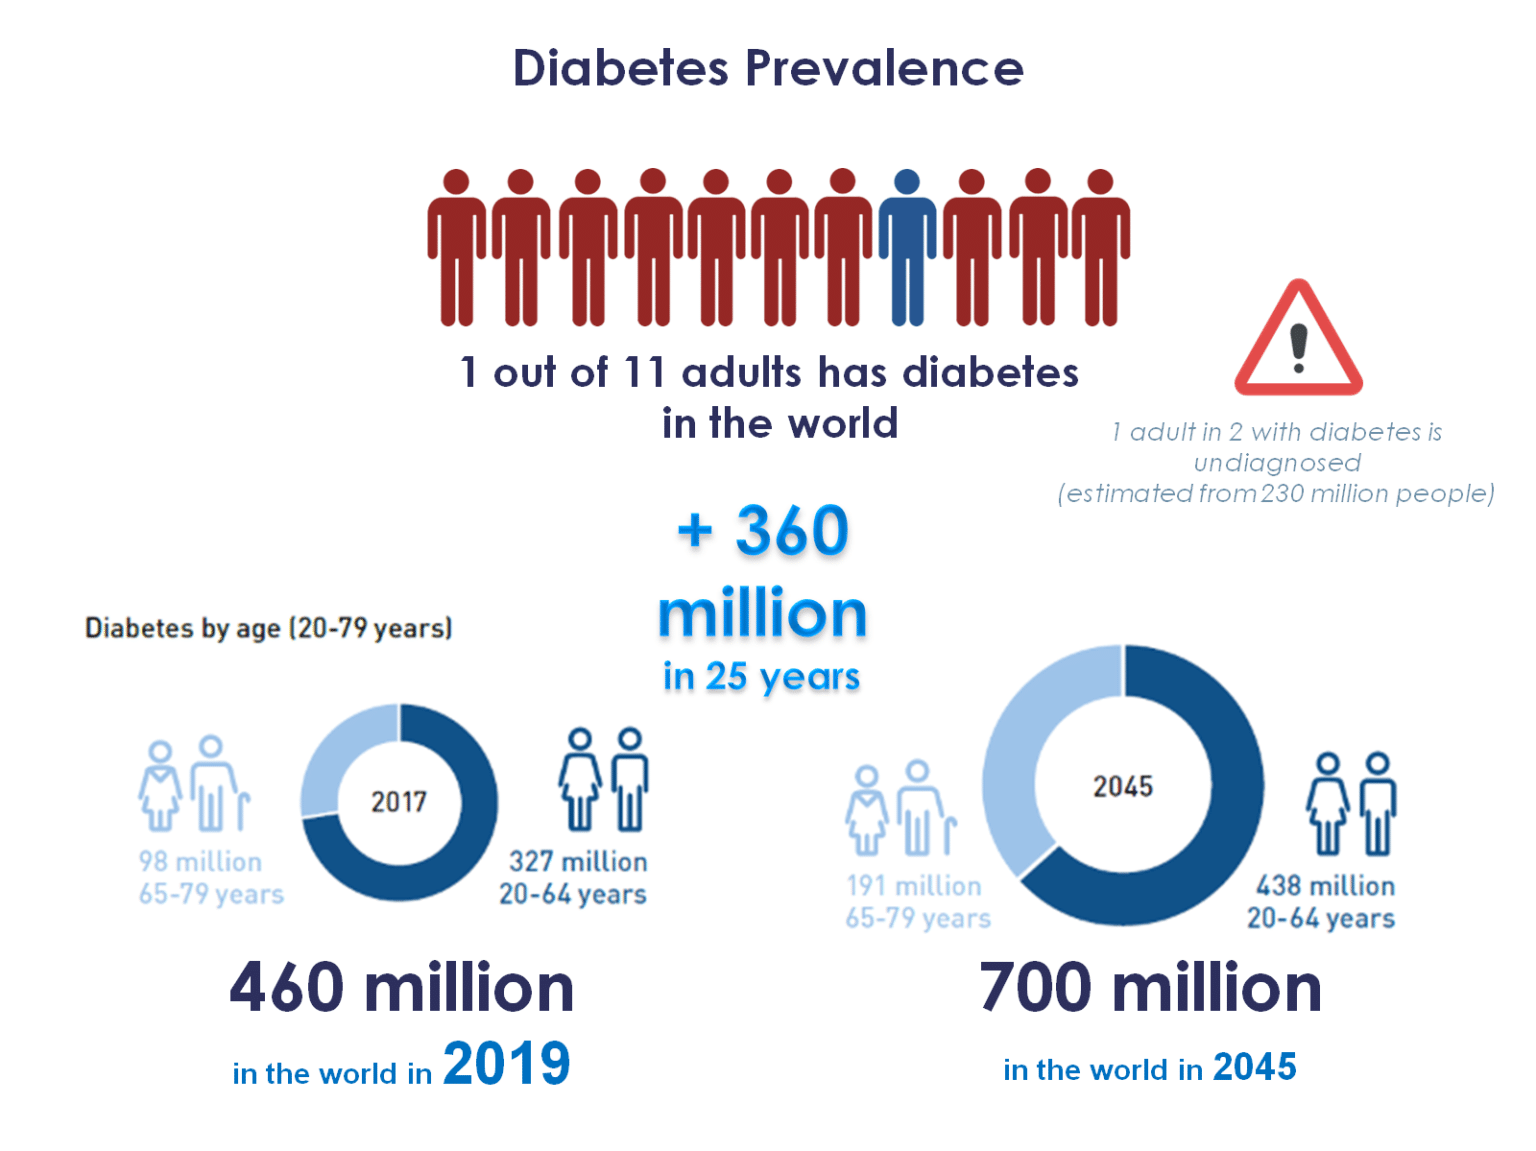 research on epidemiology of diabetes